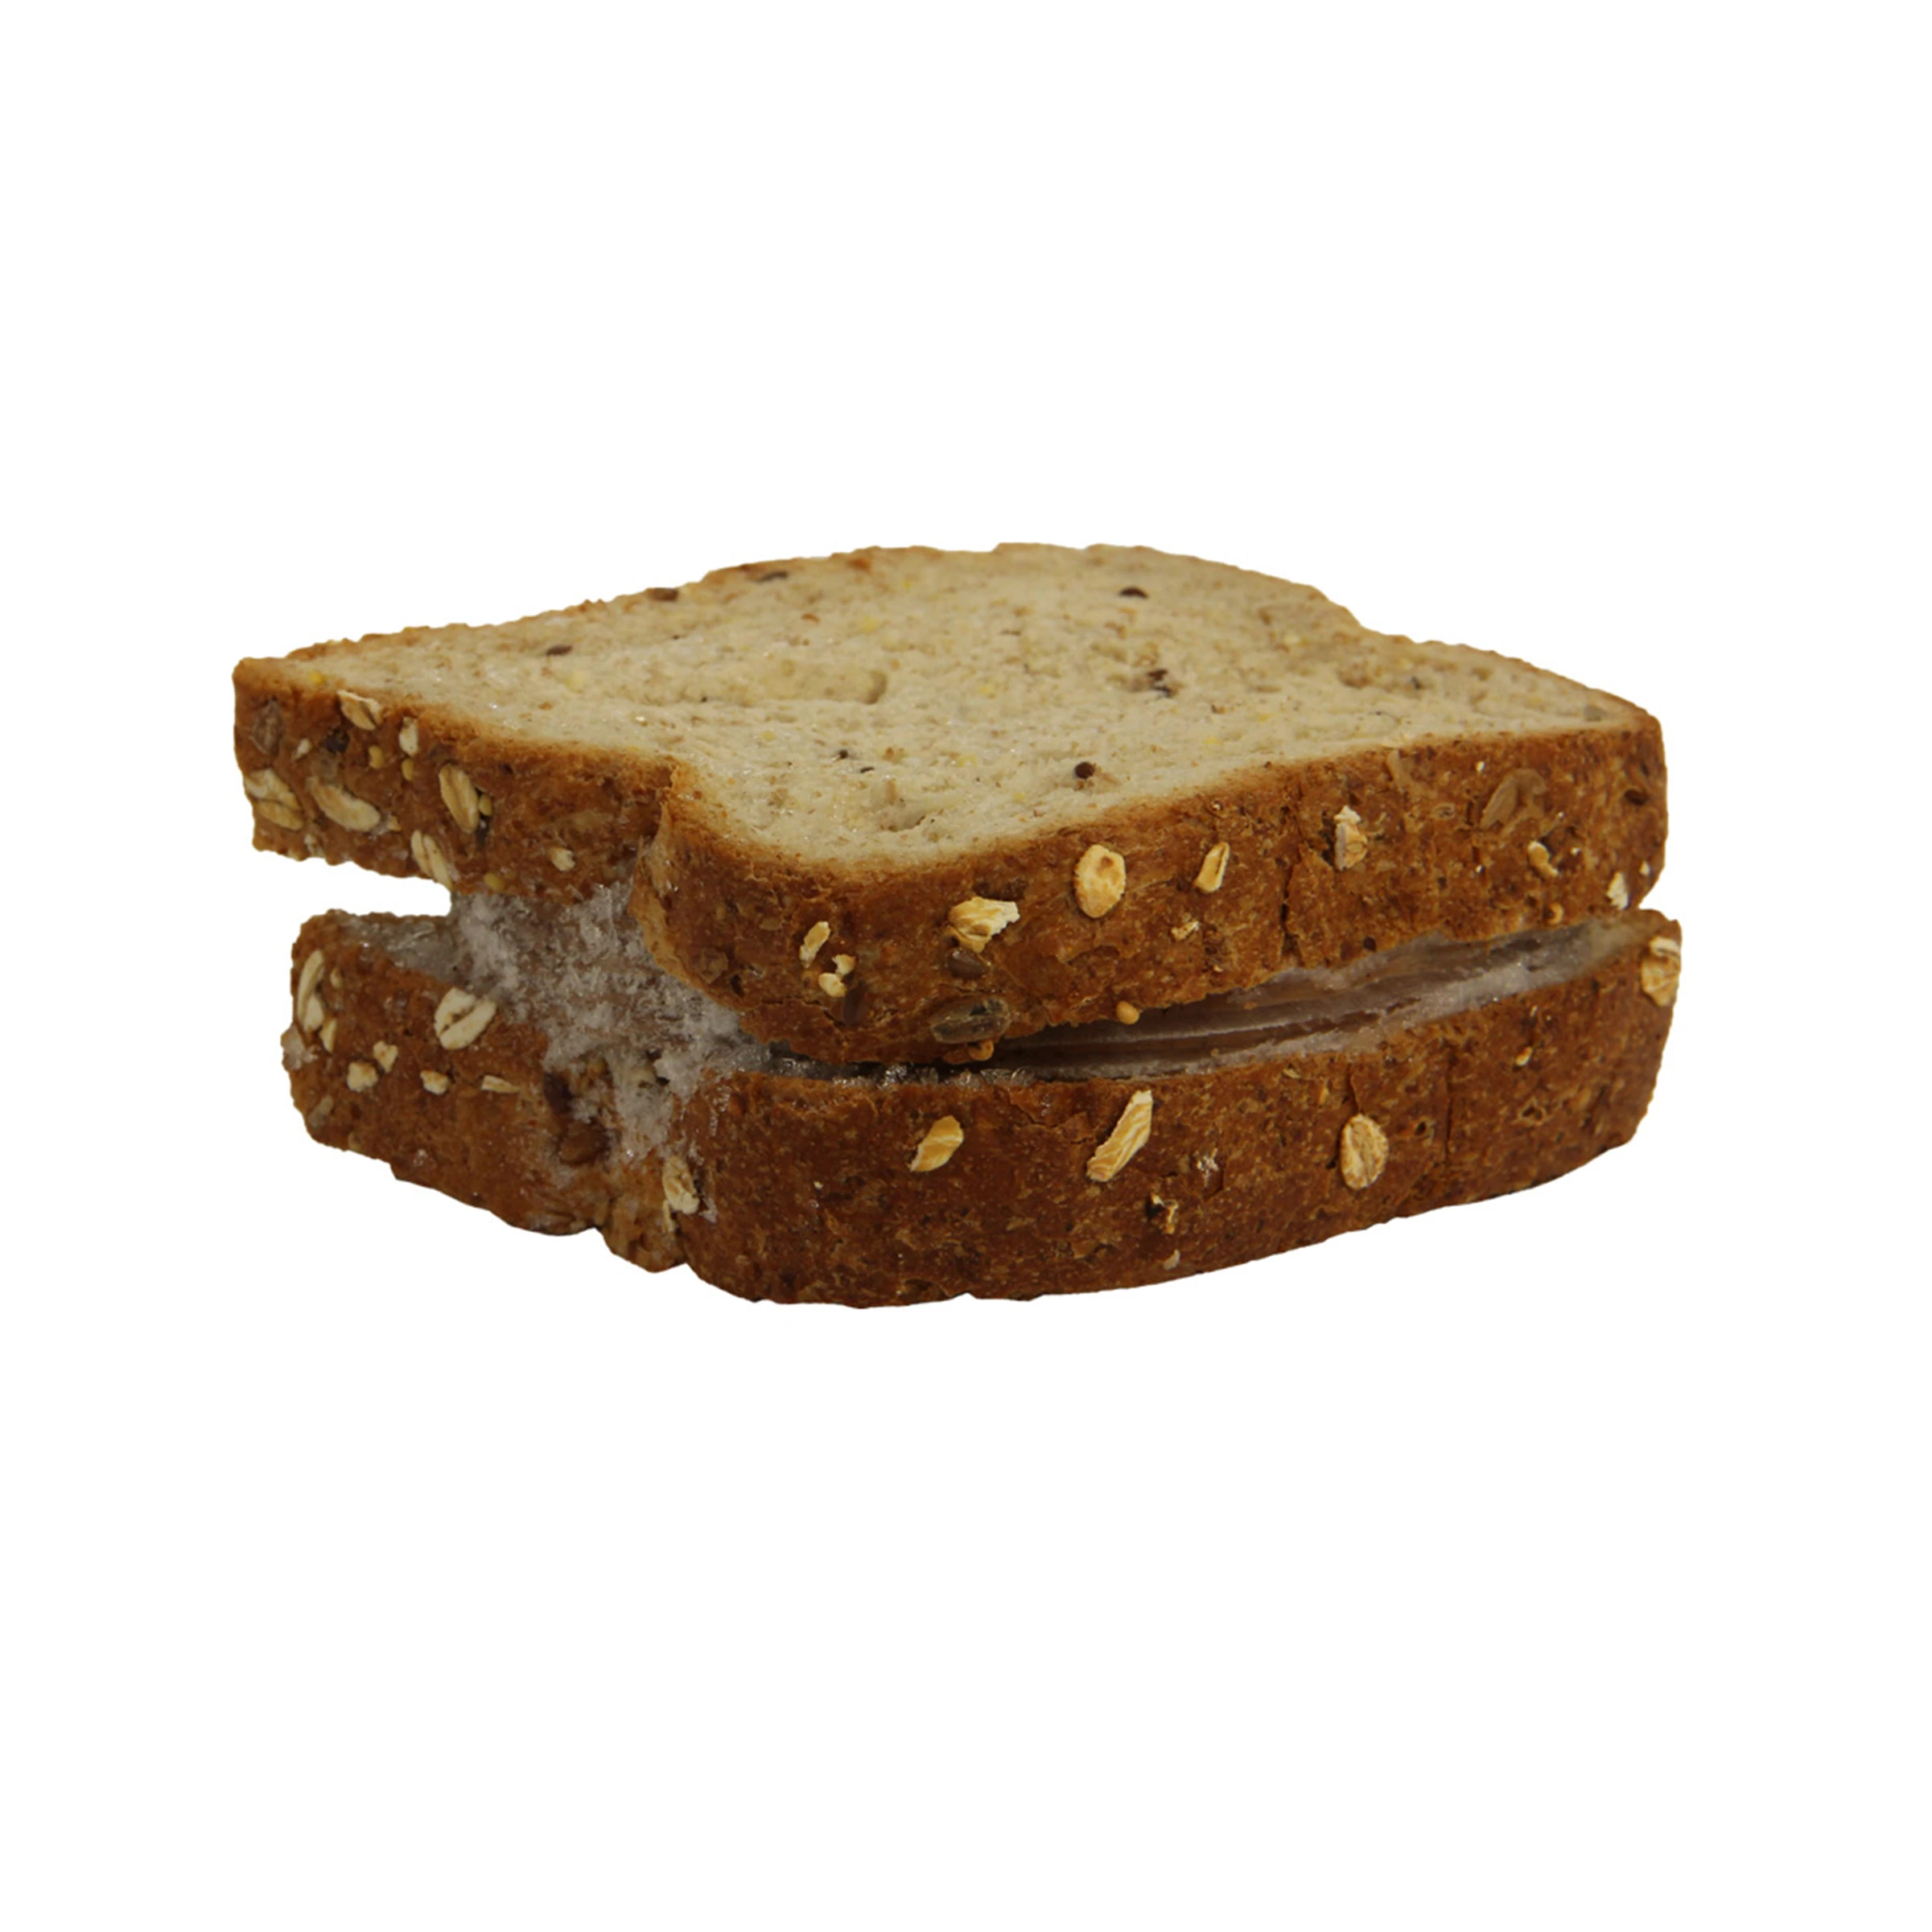 Pierre Signatures® Turkey and Provolone Cheese on Multigrain Breadhttp://images.salsify.com/image/upload/s--5dFjlkA1--/hpp5k14pfm4lcz5ijl9p.webp